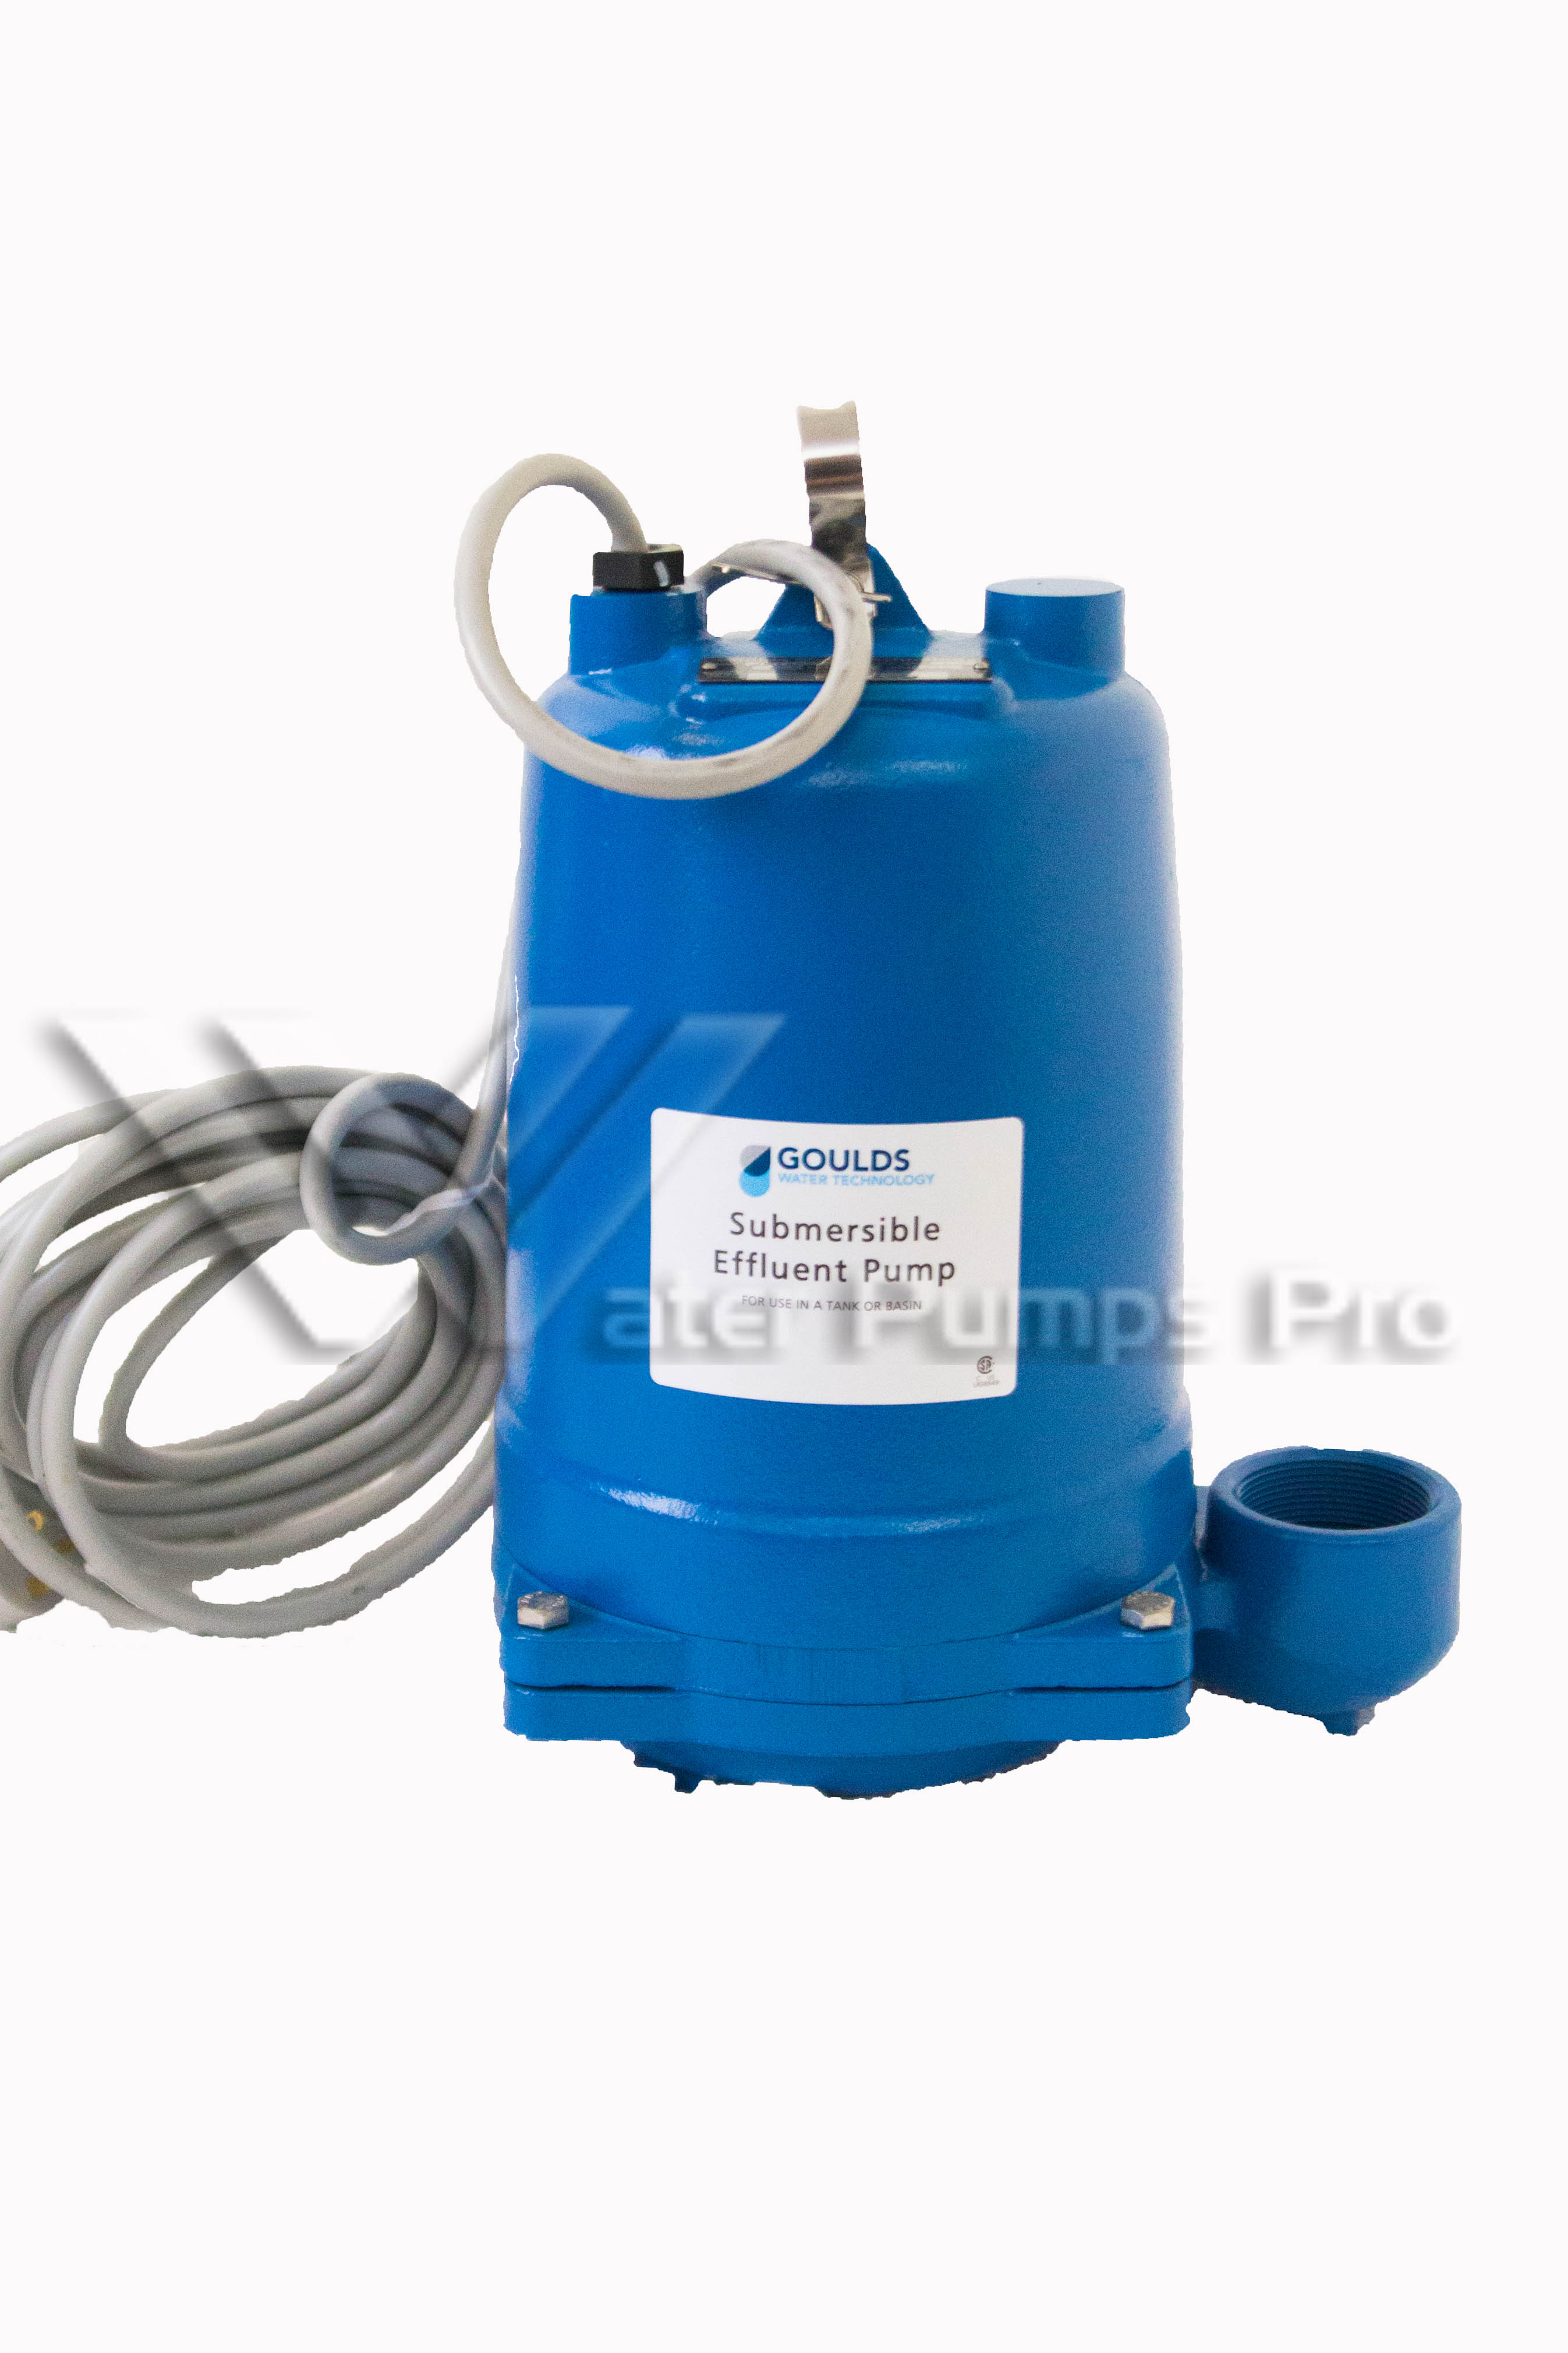 Goulds WE2012H 2 HP 230V Submersible Effluent Pump HD - Click Image to Close